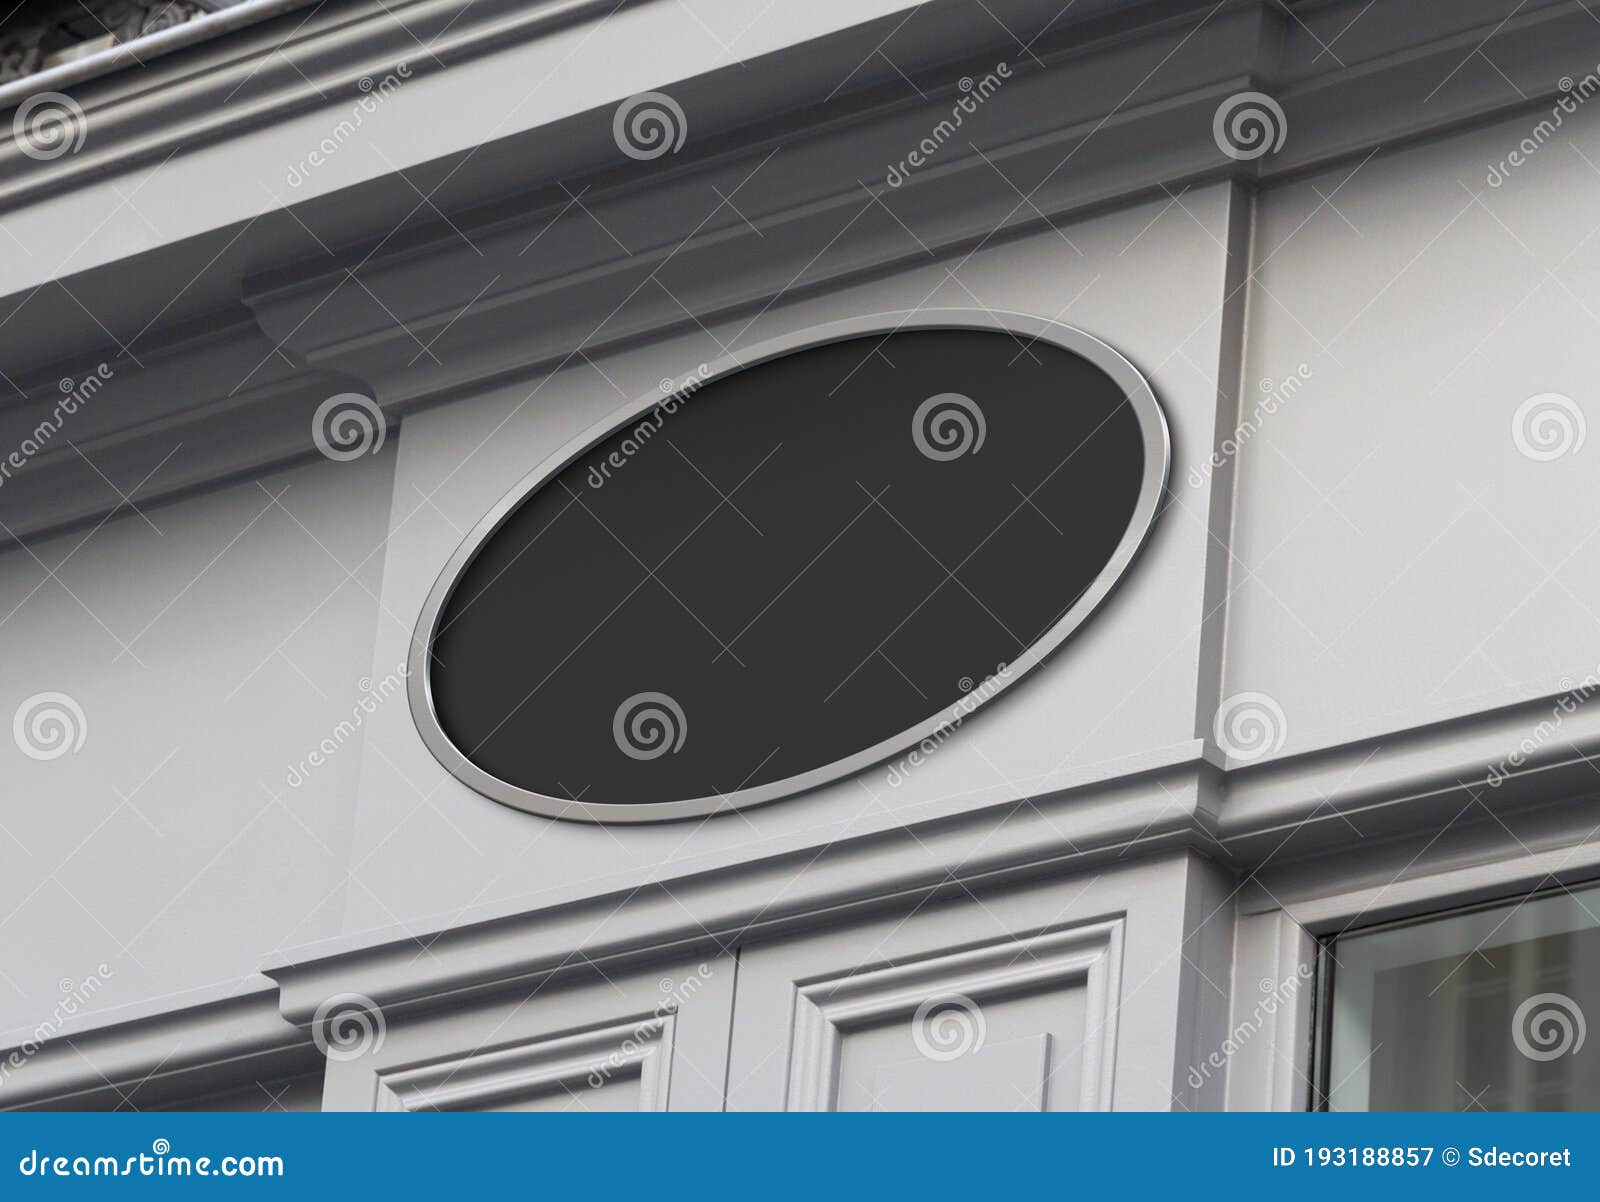 circular storefront on a grey shop frontage mockup. empty store brand signboard frame in street